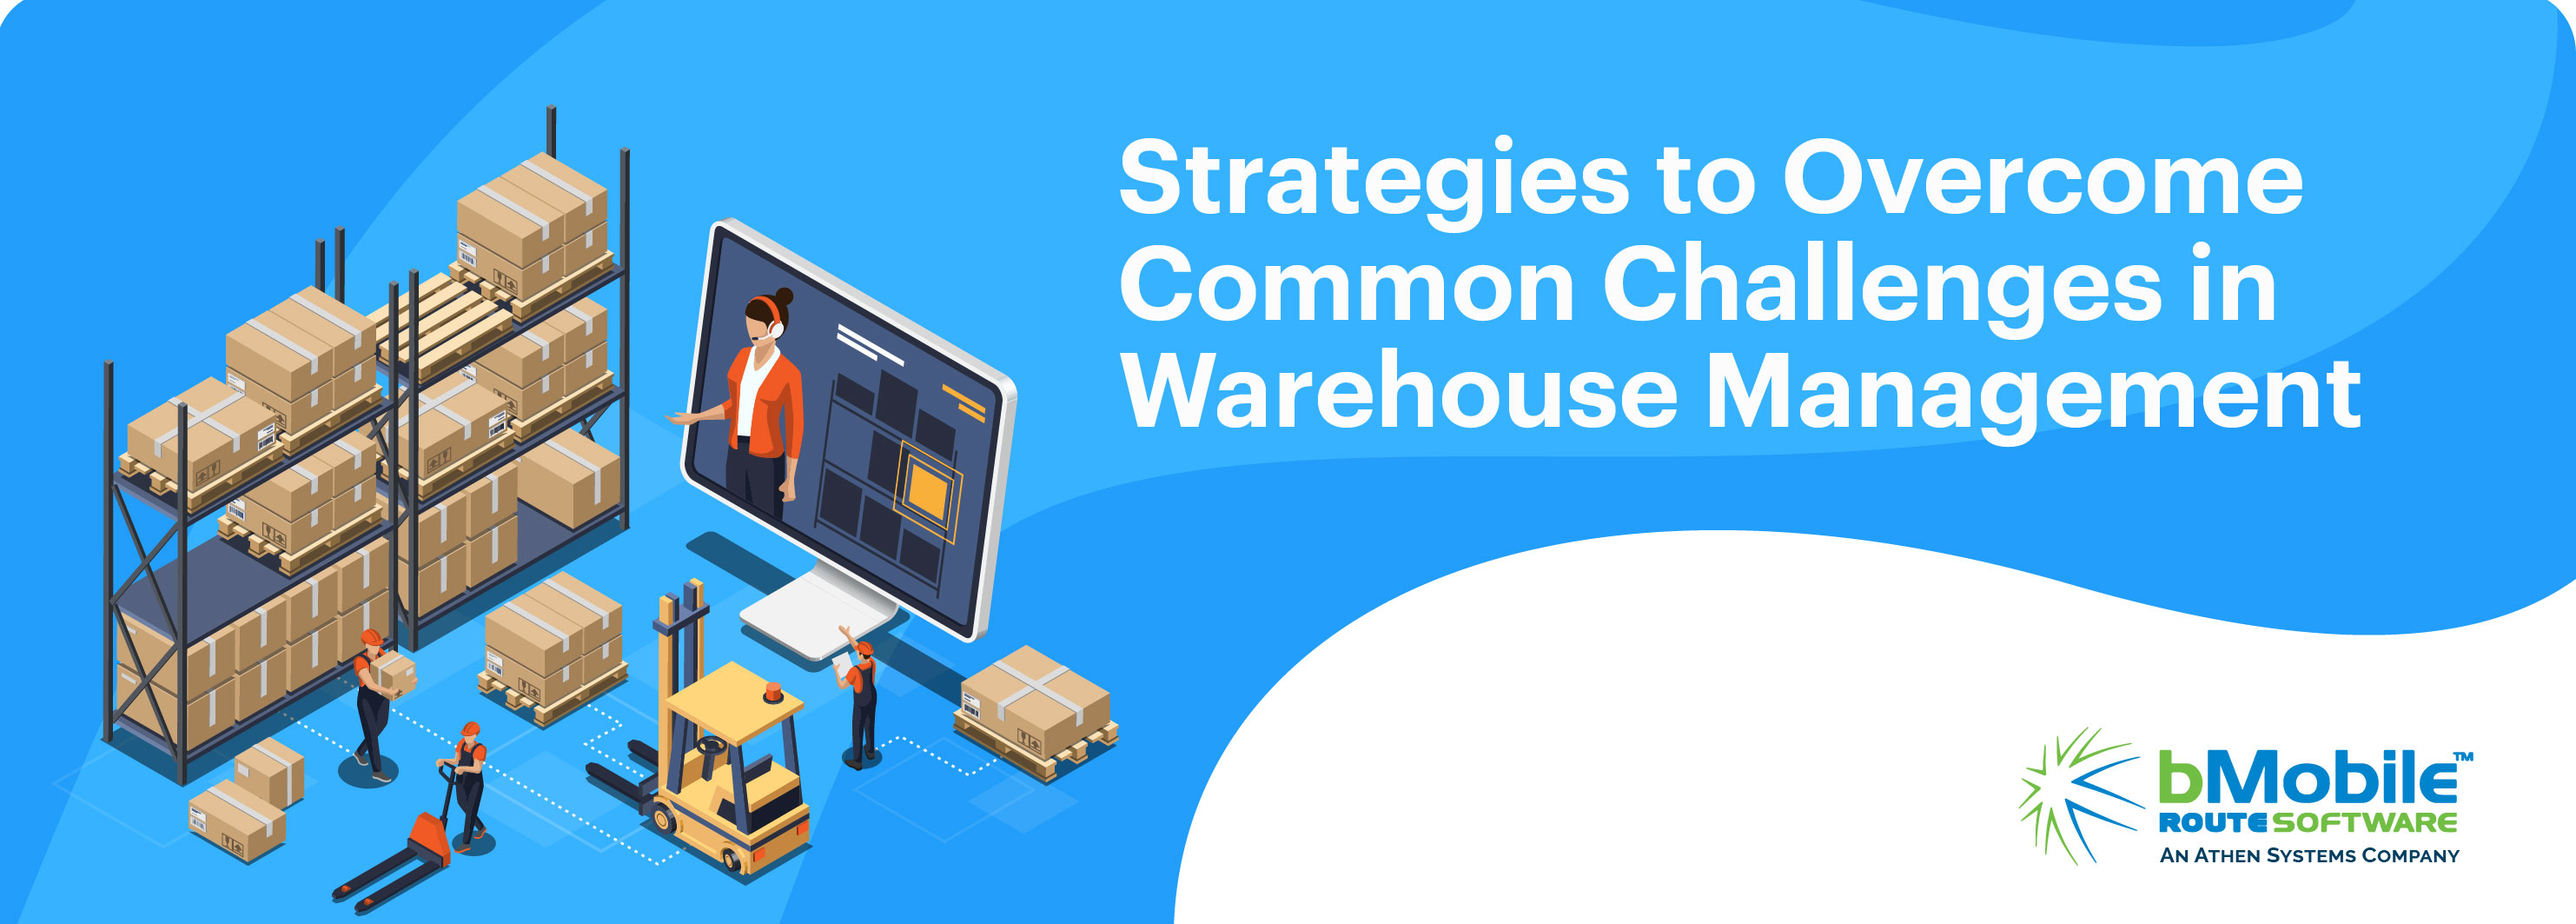 Strategies to Overcome Common Challenges in Warehouse Management